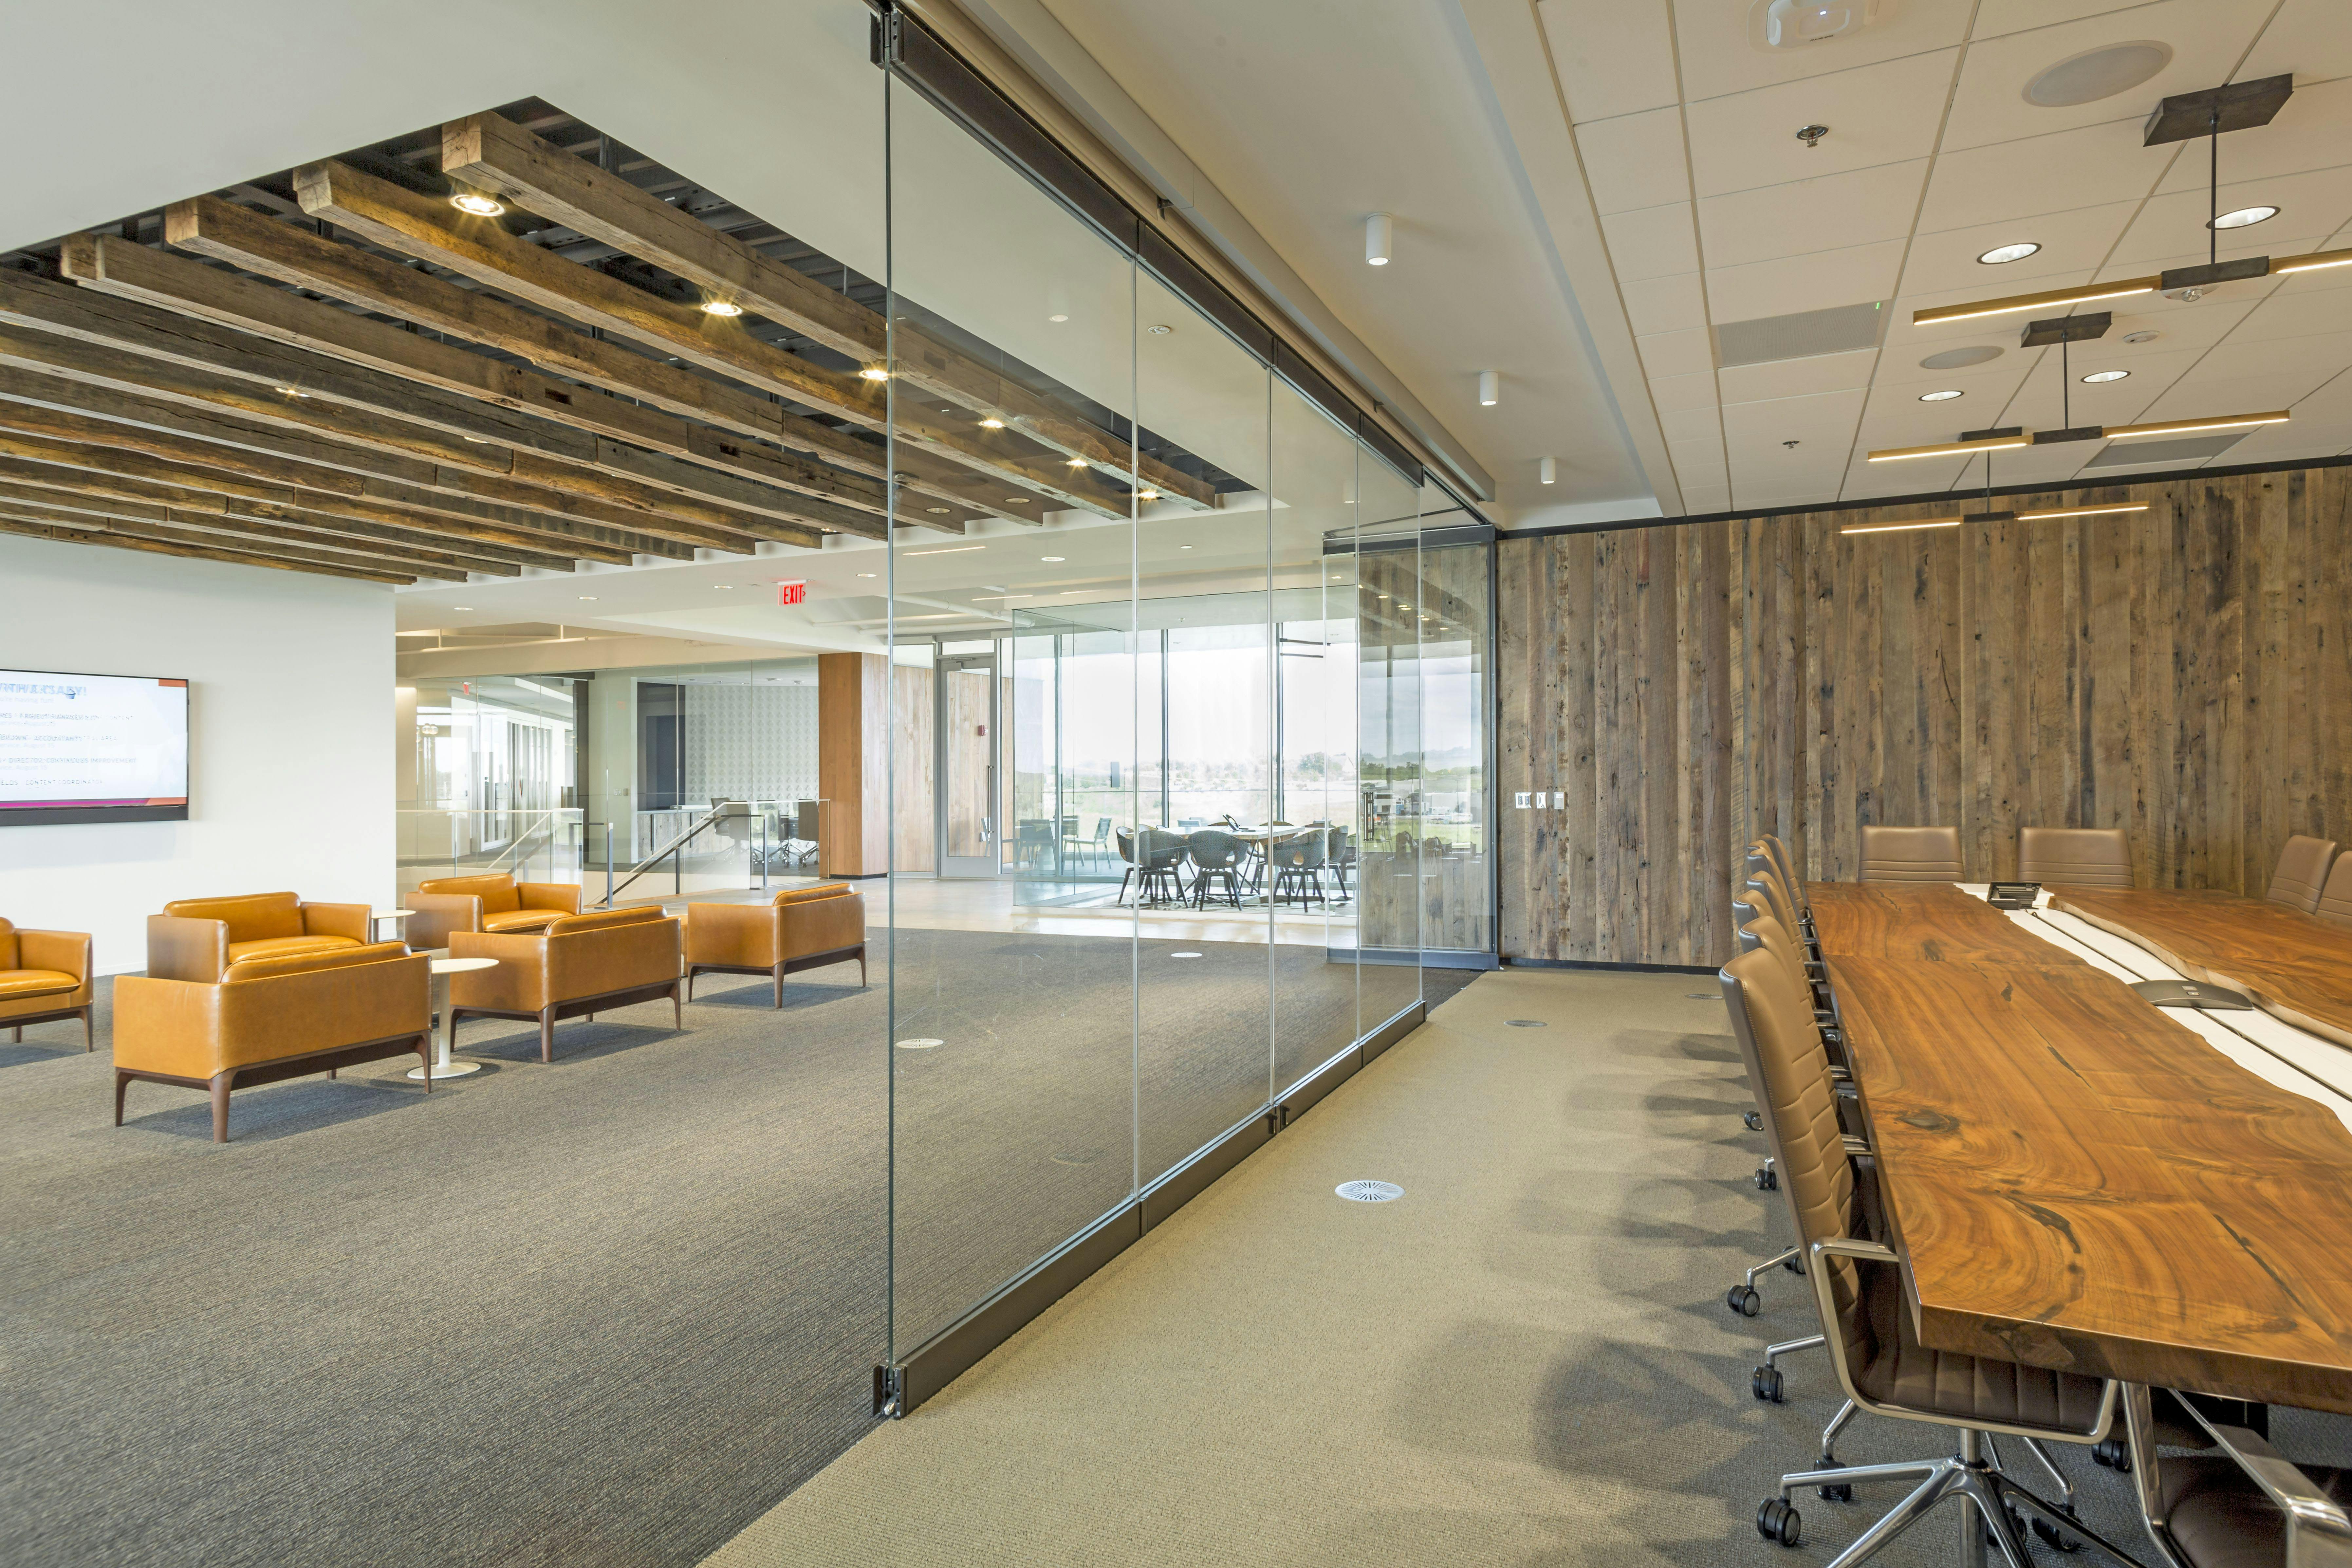 Sound-rated Frameless sliding glass wall systems